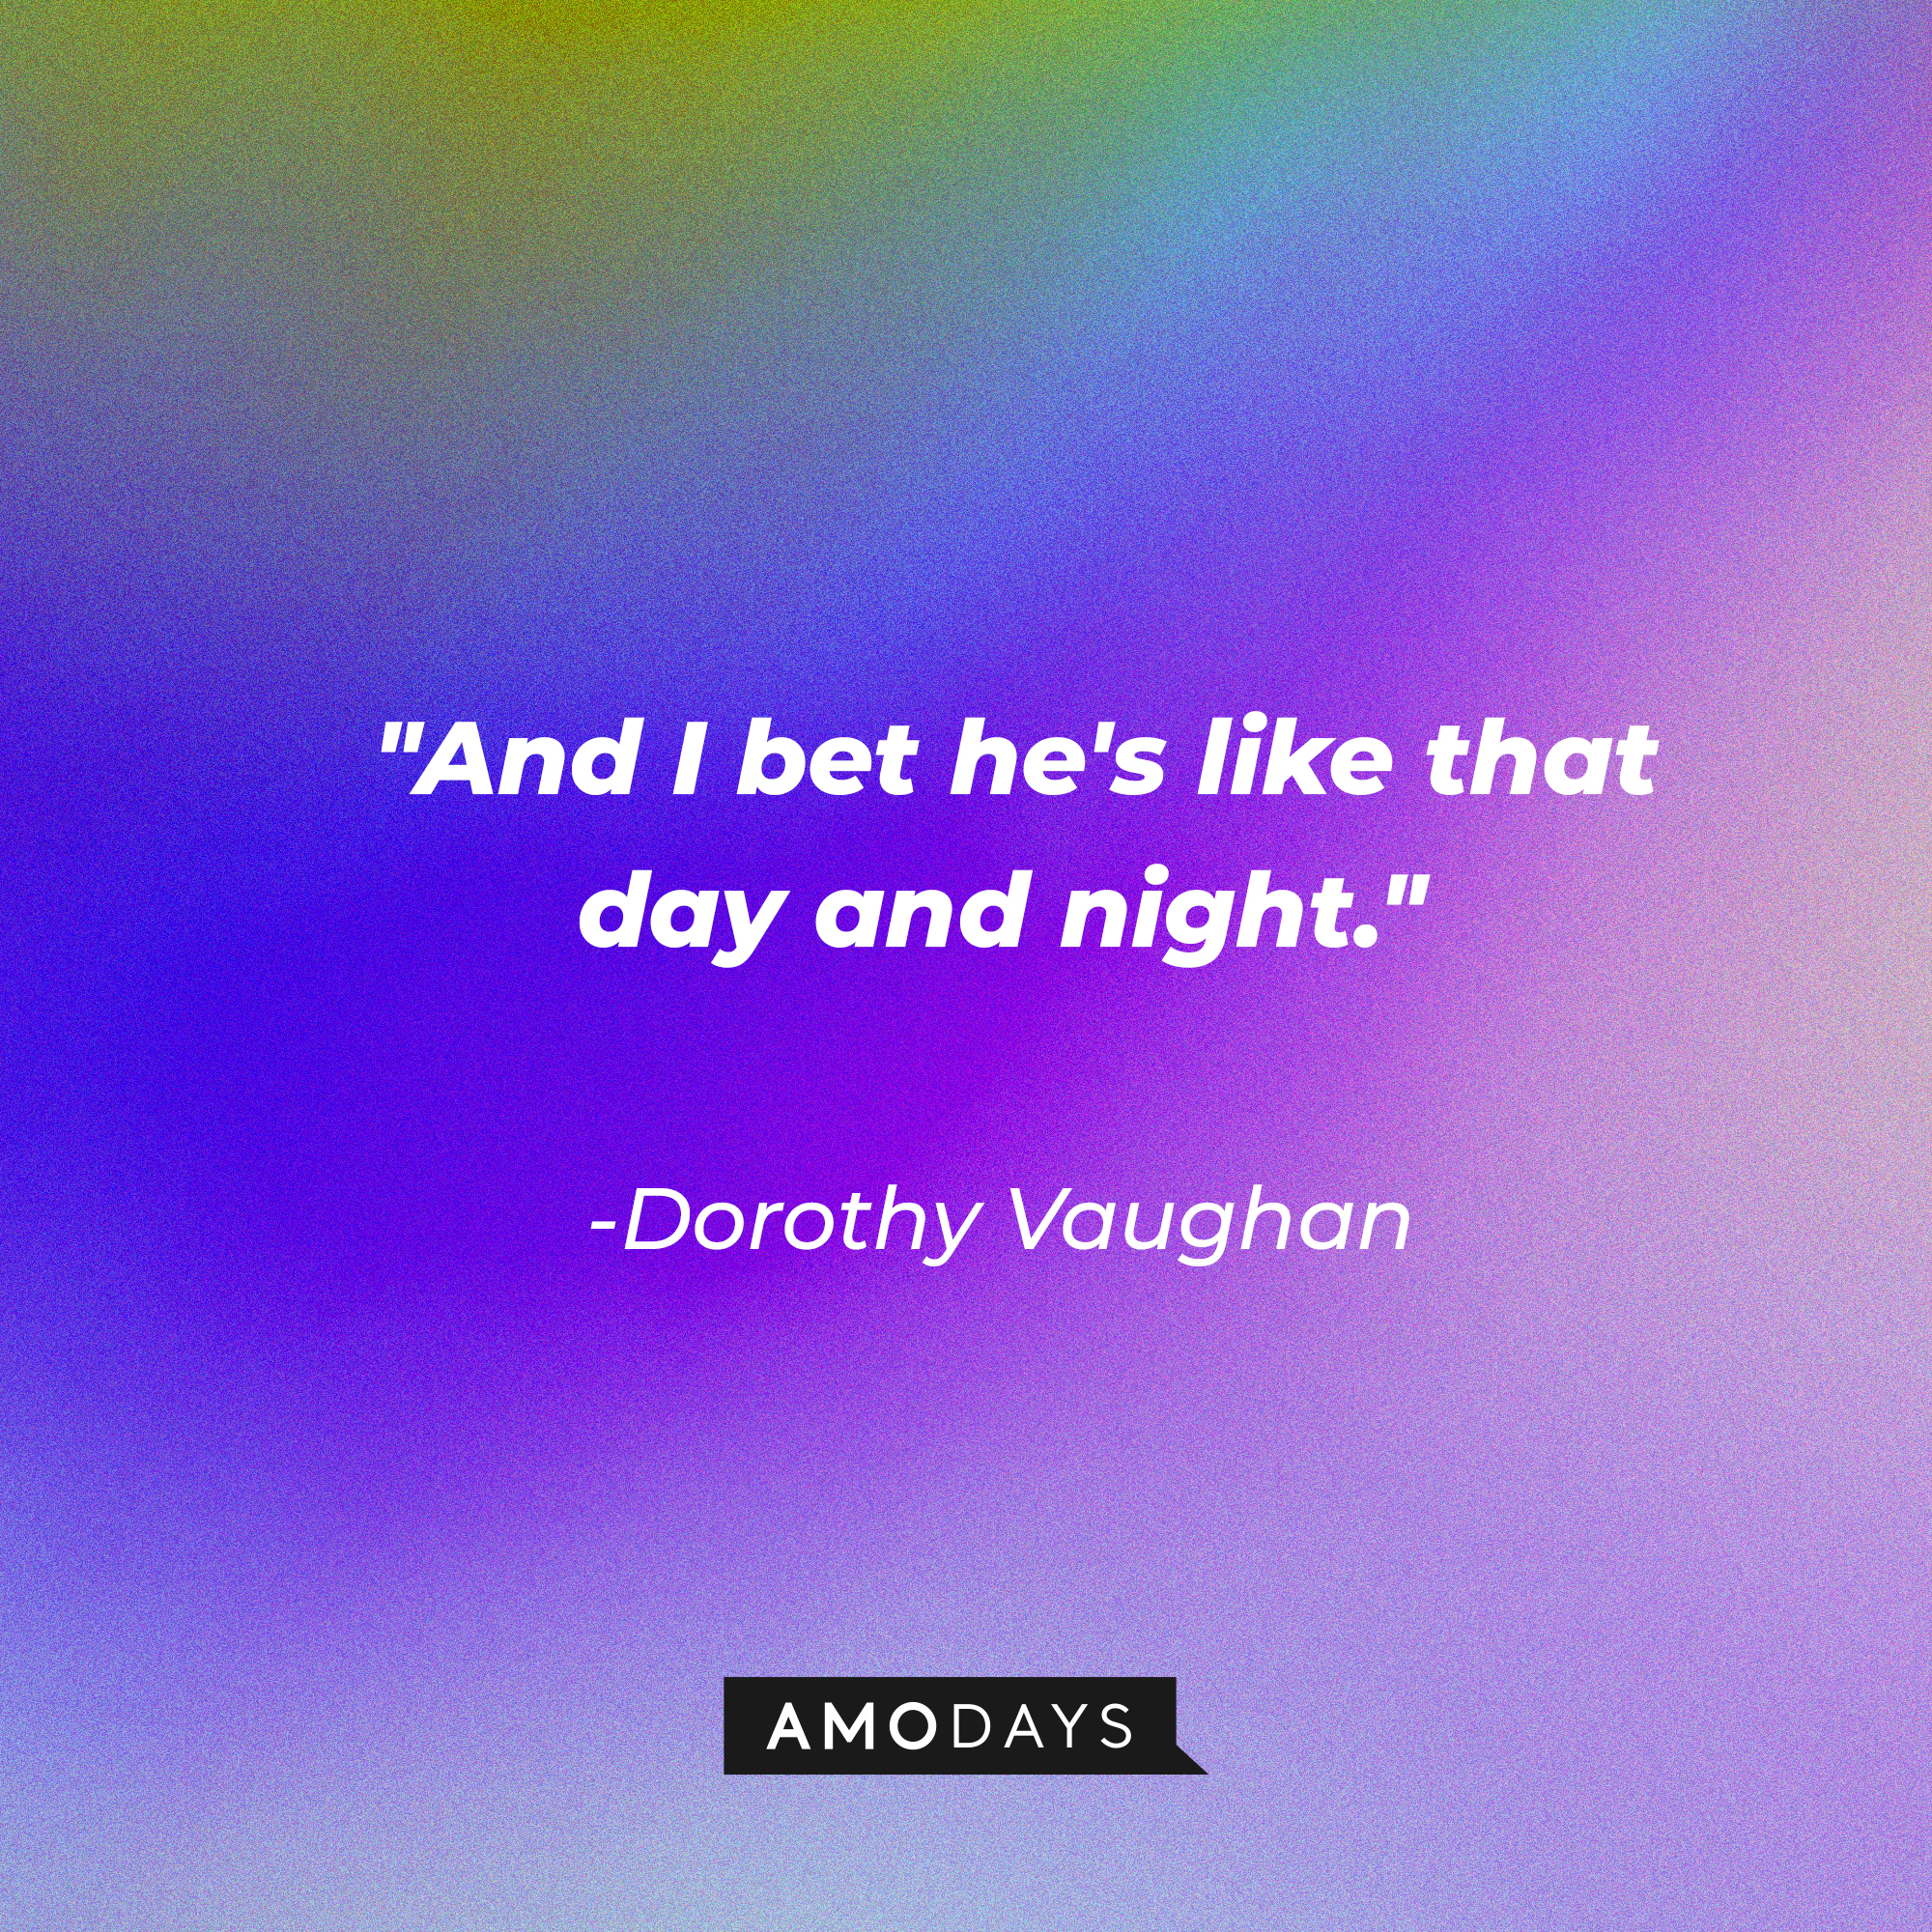 Dorothy Vaughan's quote: “And I bet he's like that day and night.”  | Source: Amodays